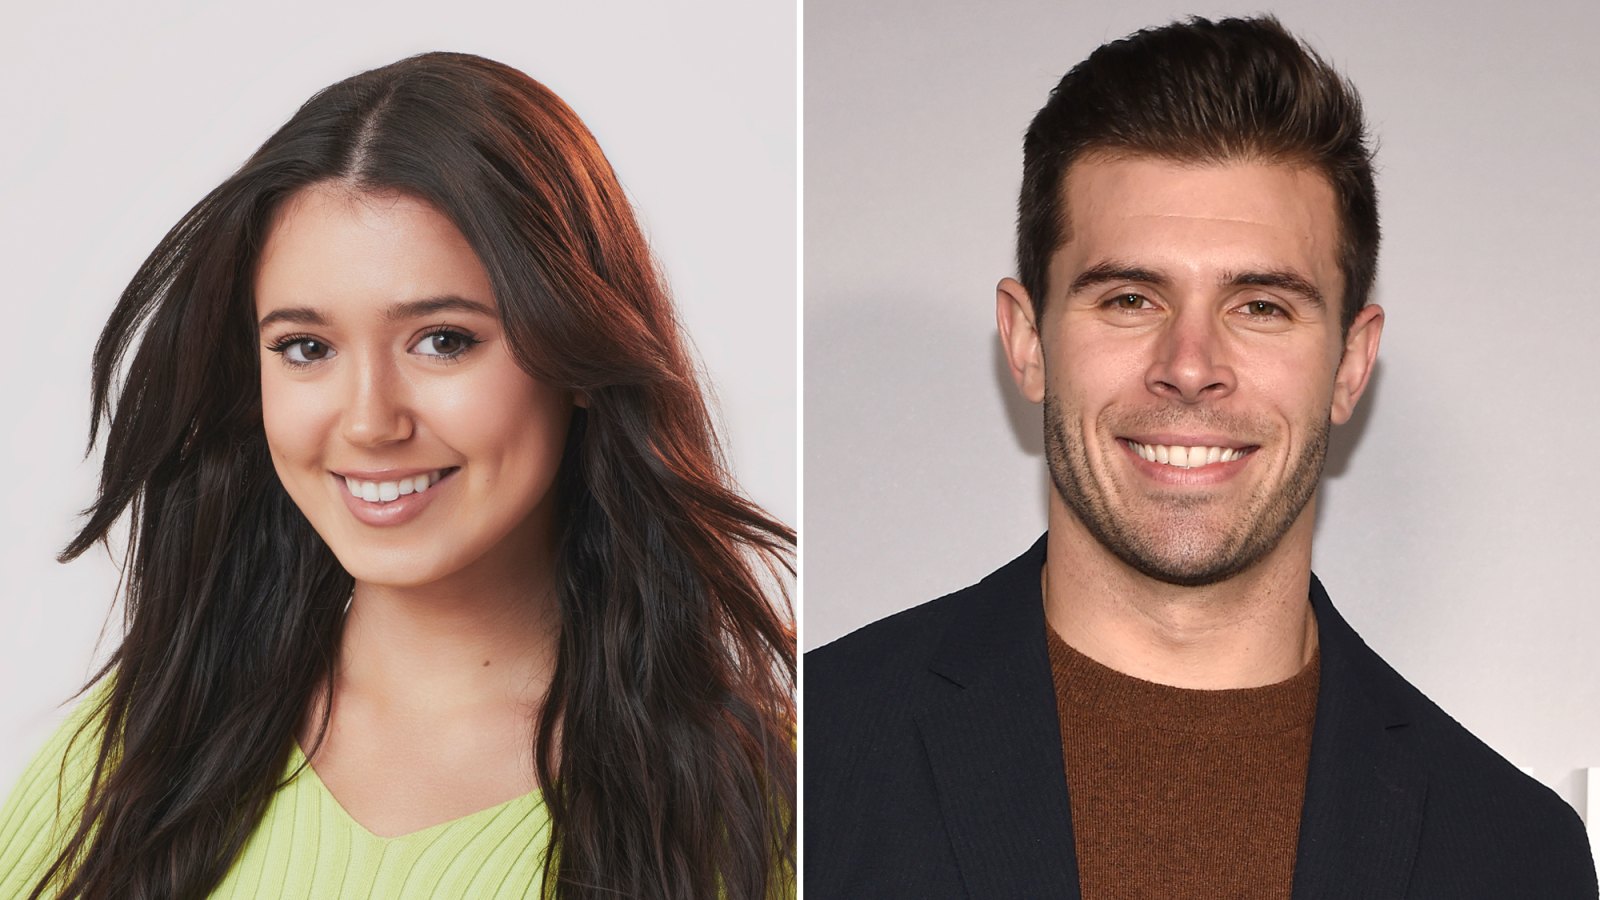 The Bachelor's Greer Blitzer Throws Shade at Zach Shallcross After Awkward Zoom Date